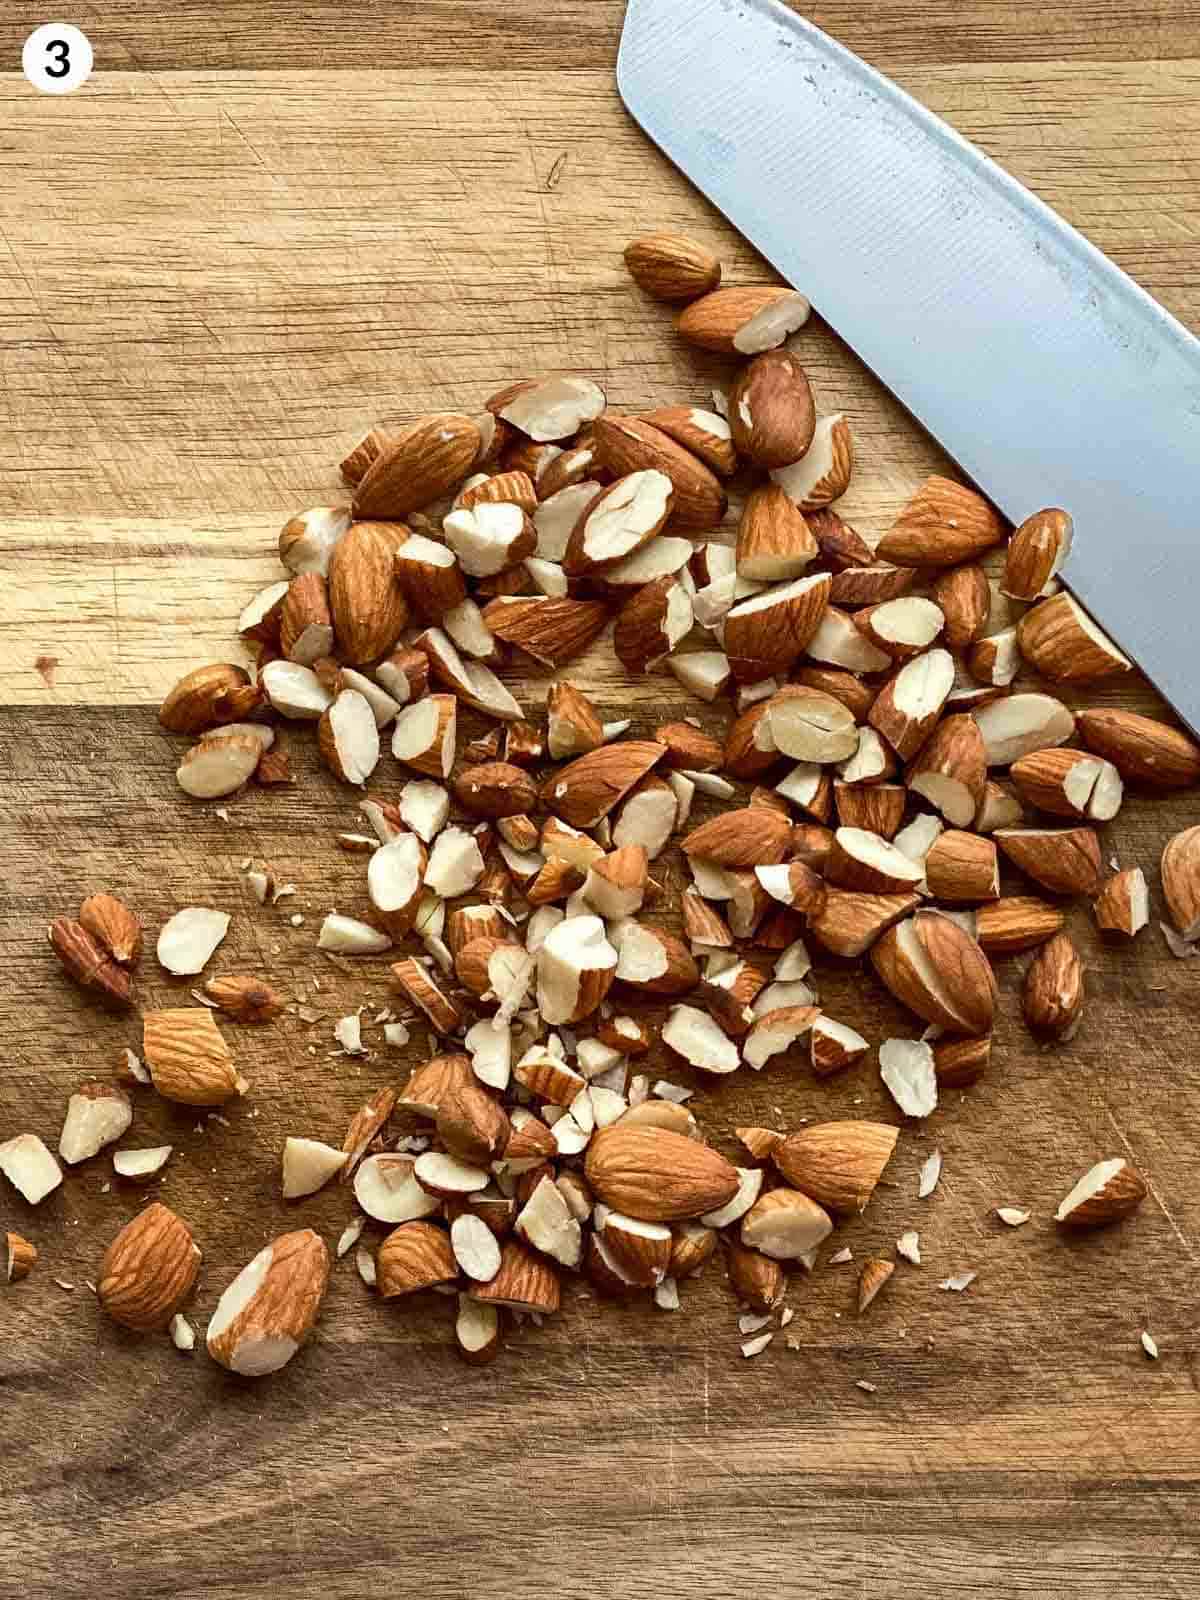 chopped almonds with a knifeon the side on a wooden chopping board